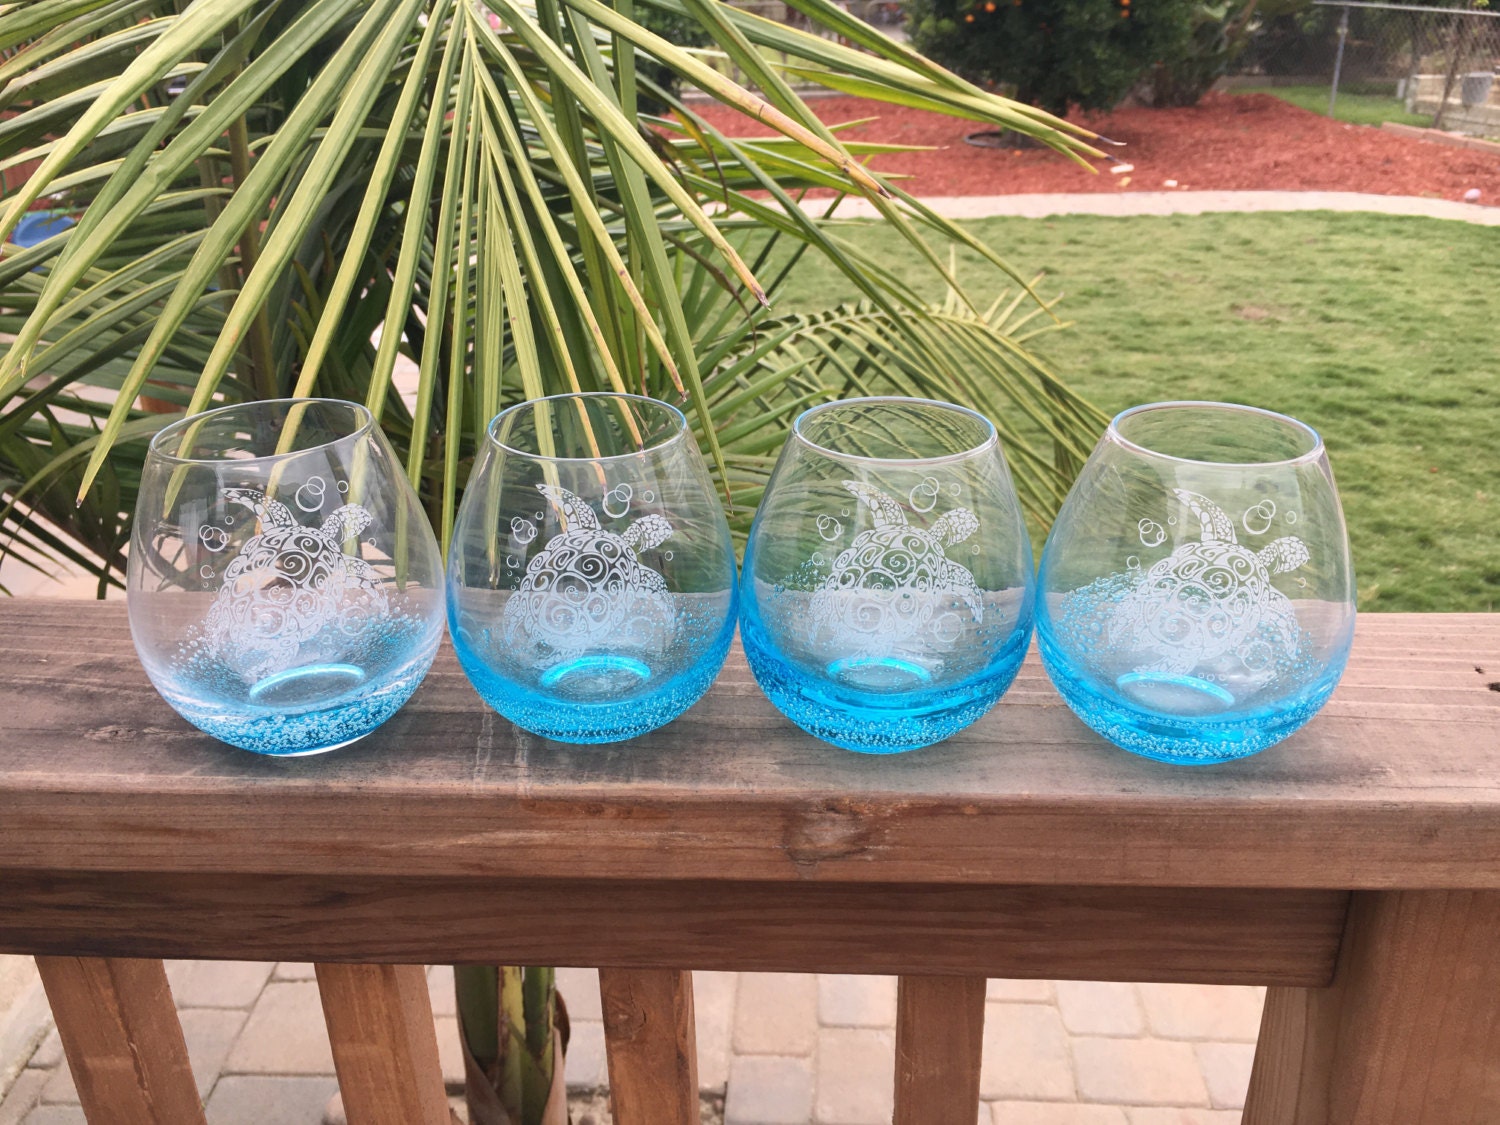 Set of 4 Turtle Wine Glasses, sea turtles, etched glasses, glasses with designs, island living